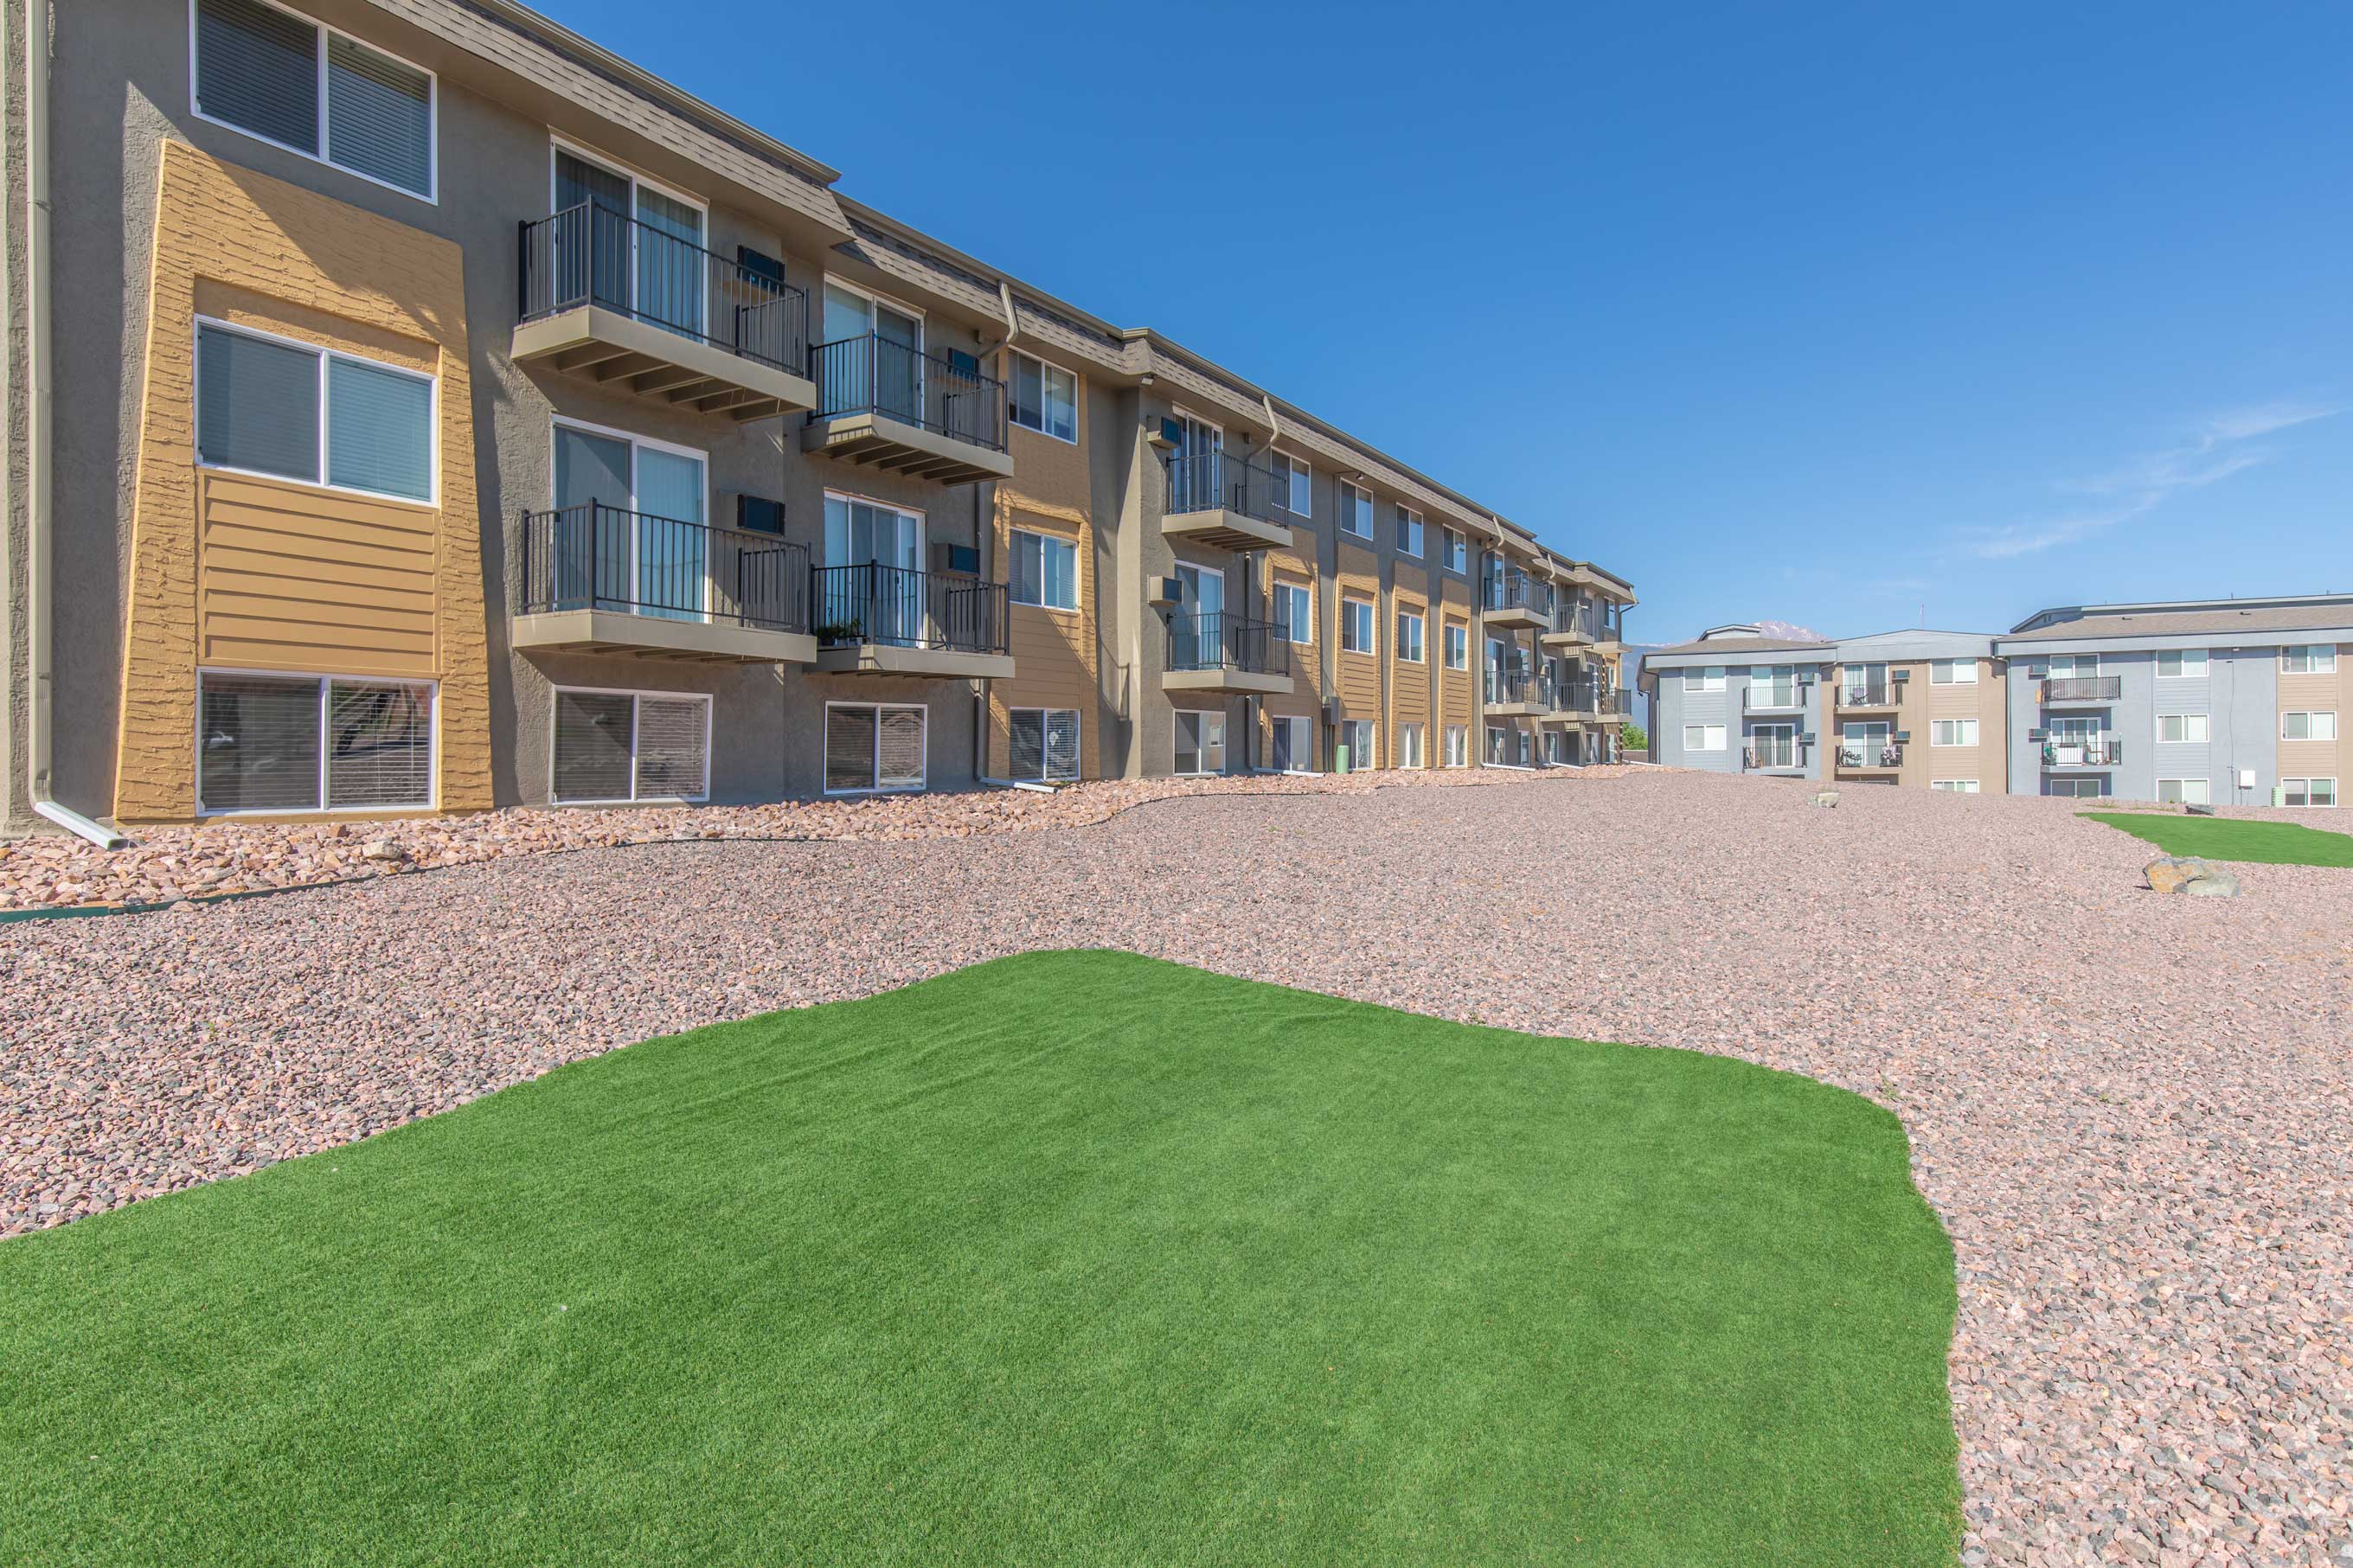 One and two bedroom apartments with balconies at the Ascent Apartments, in Colorado Springs, CO